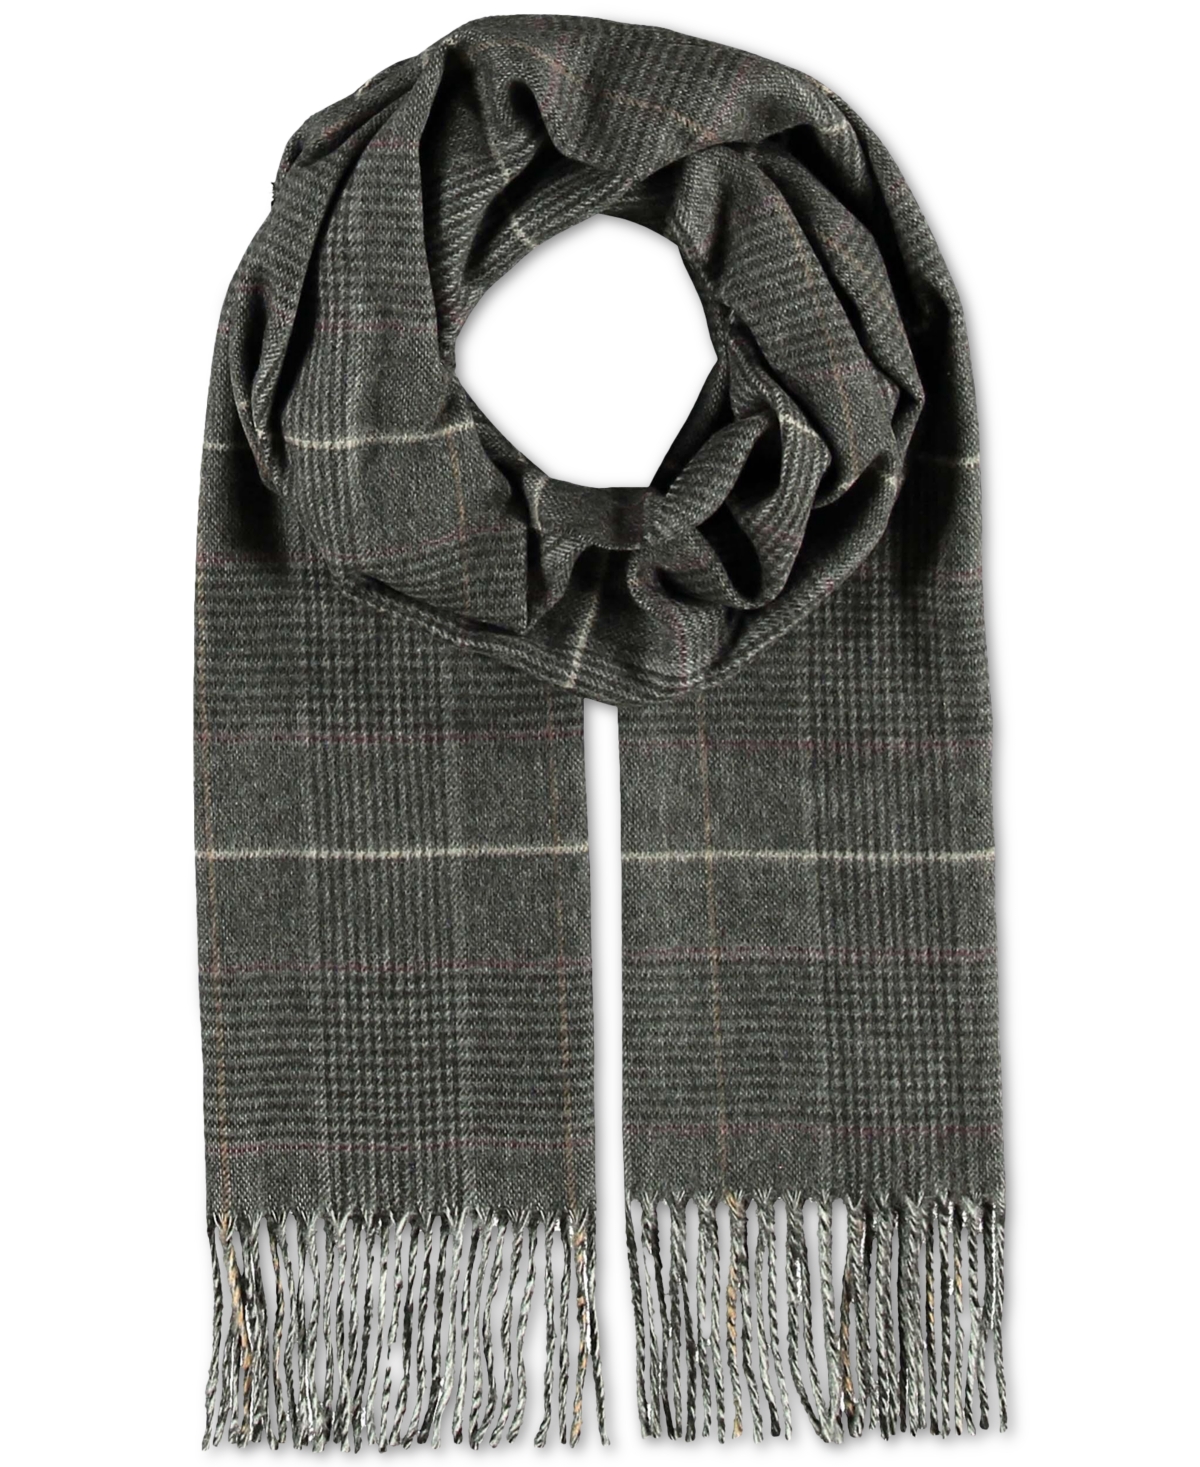 Men's Prince of Wales Plaid Scarf - Grey